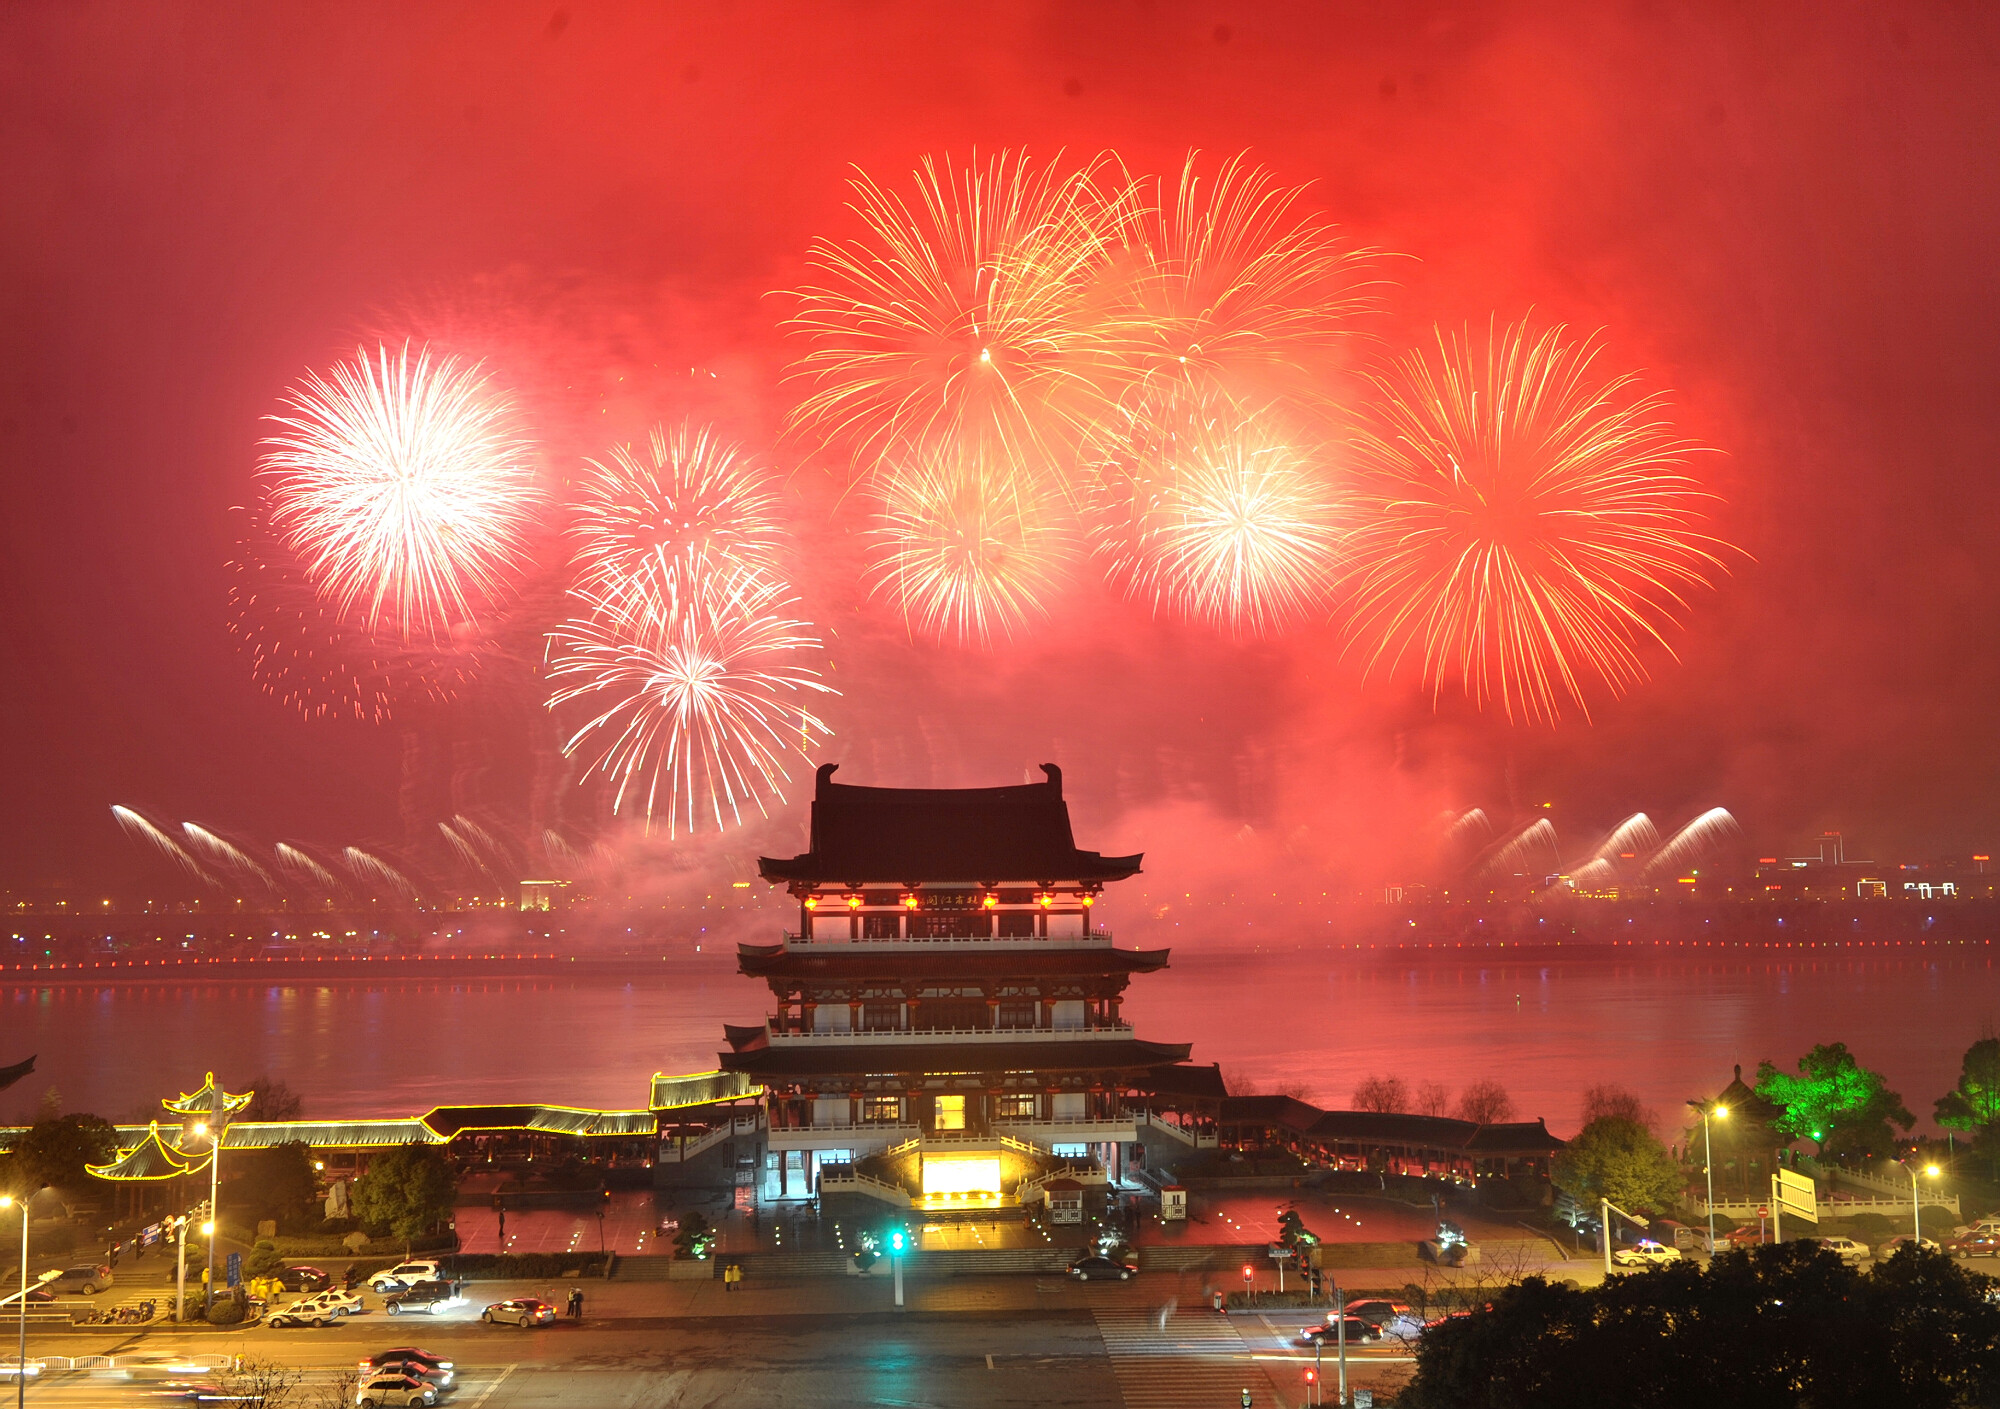 Where to Celebrate Chinese New Year in 2020? Best Places & Dates